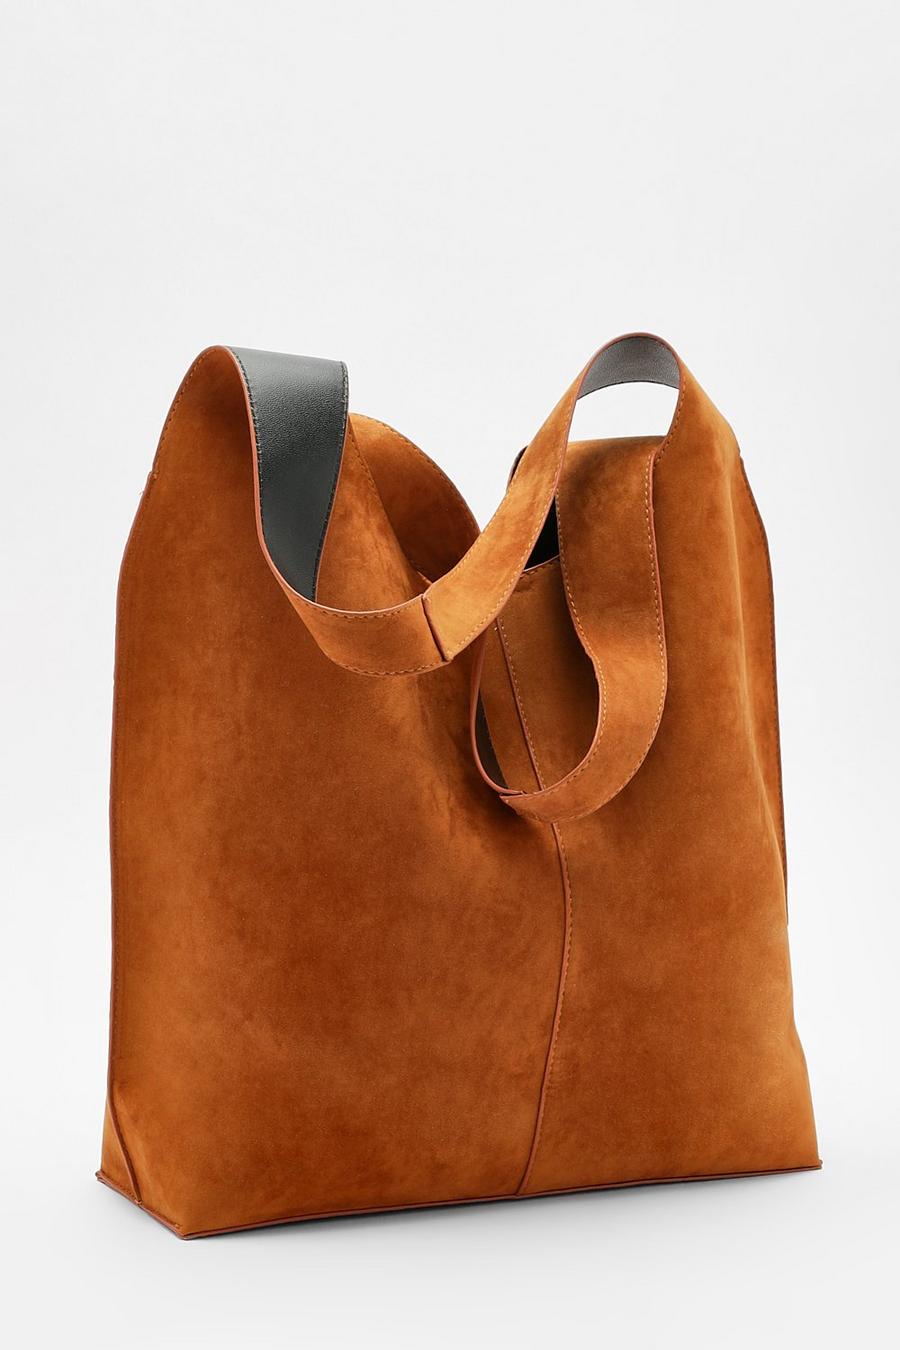 Tan Suedette Slouch Tote Bag